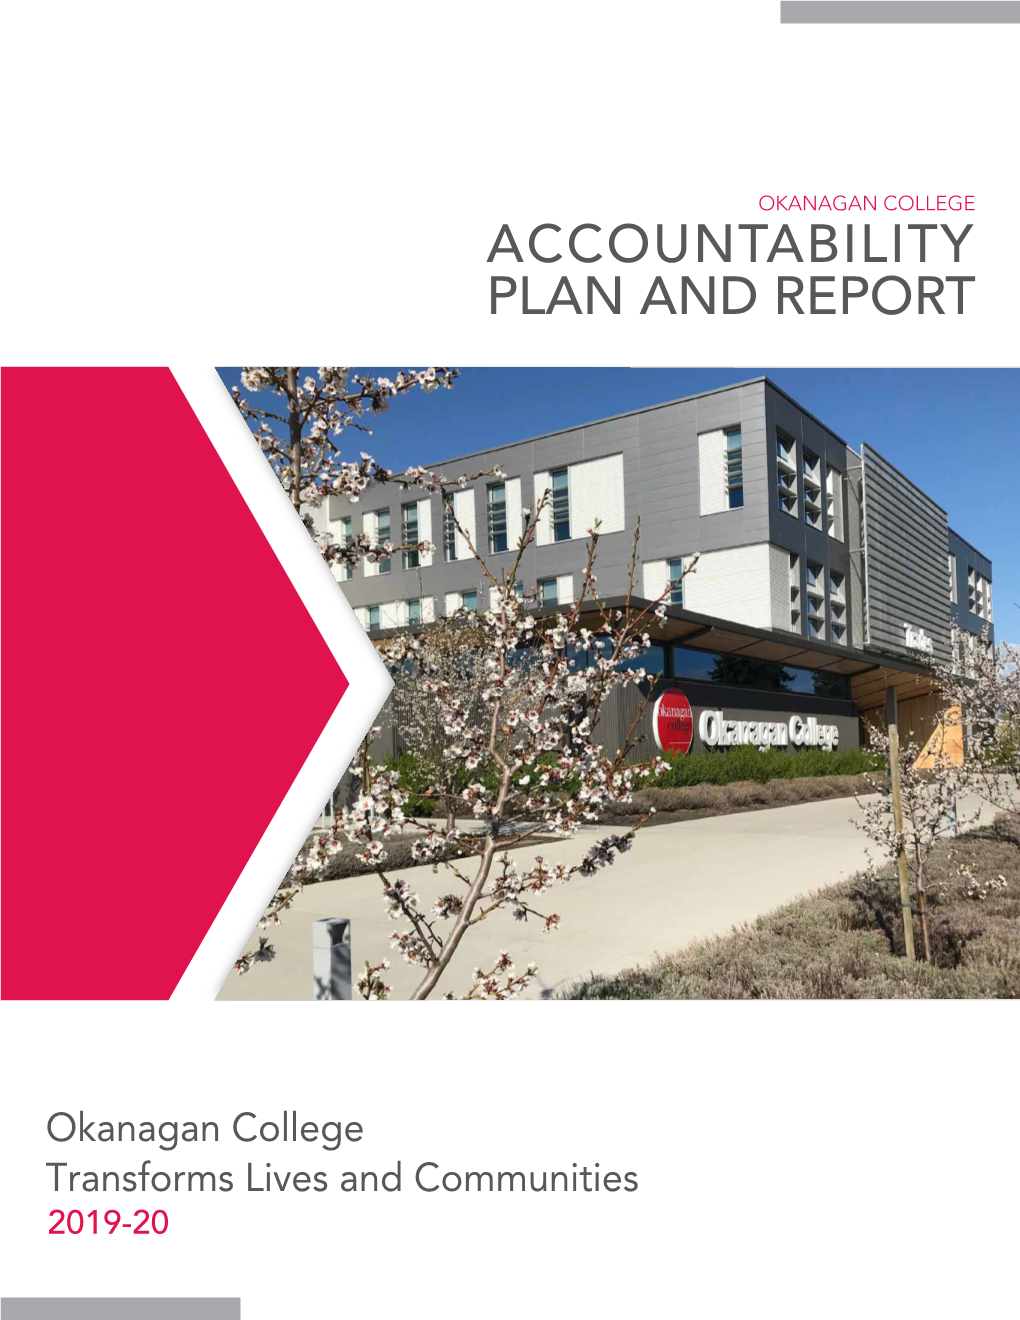 Accountability Plan and Report